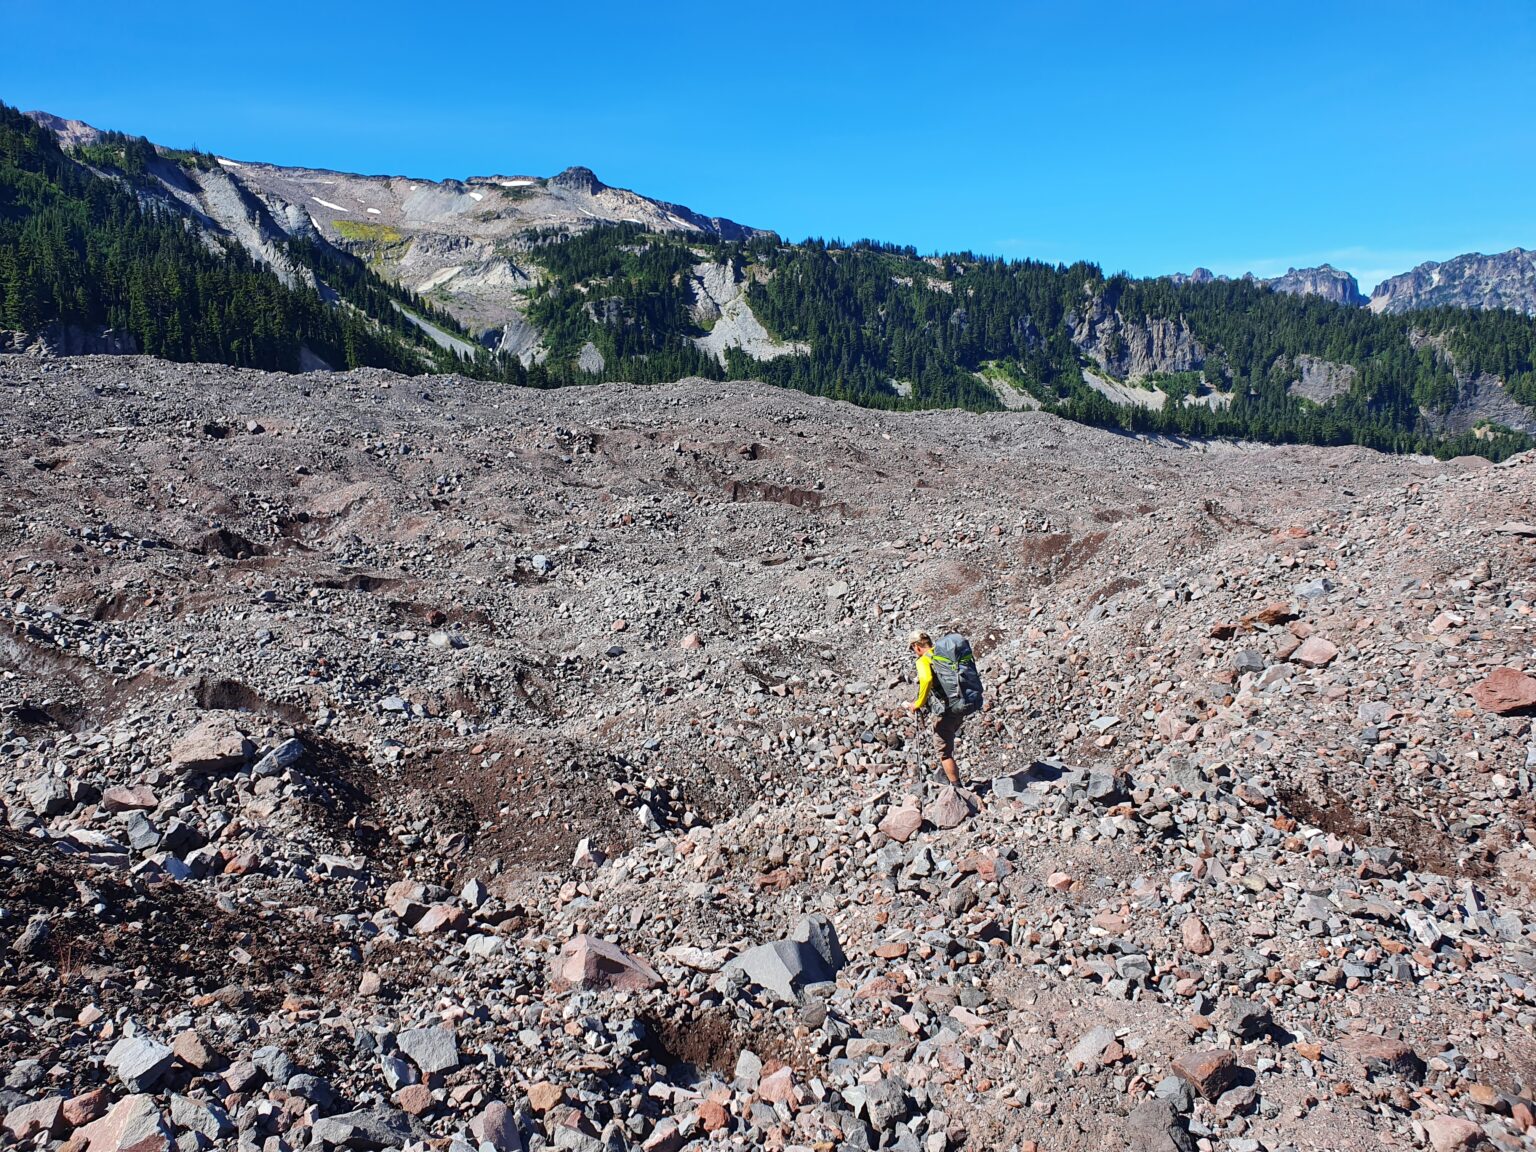 Hiking across the Carbon Glacier during the summer